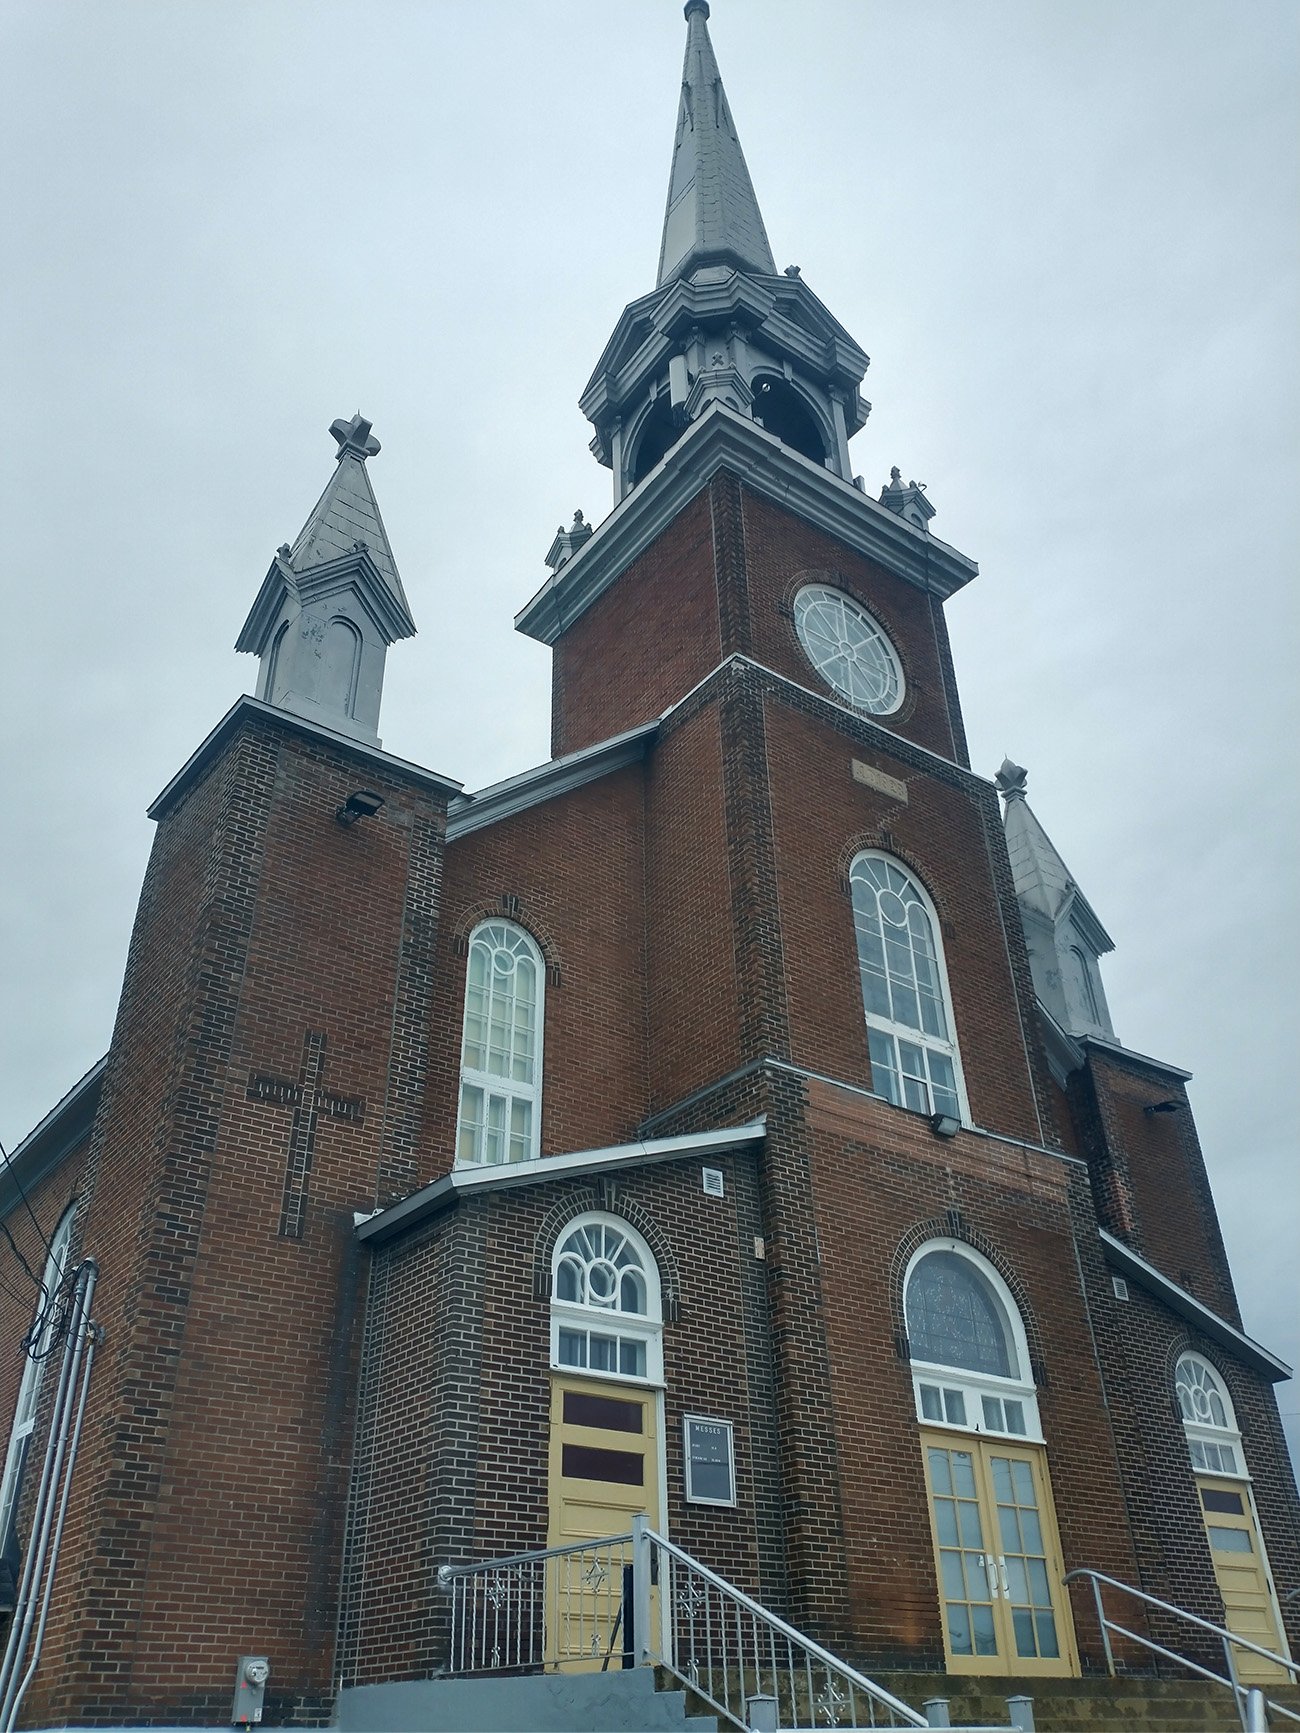 Literally every town has a church, I told you.